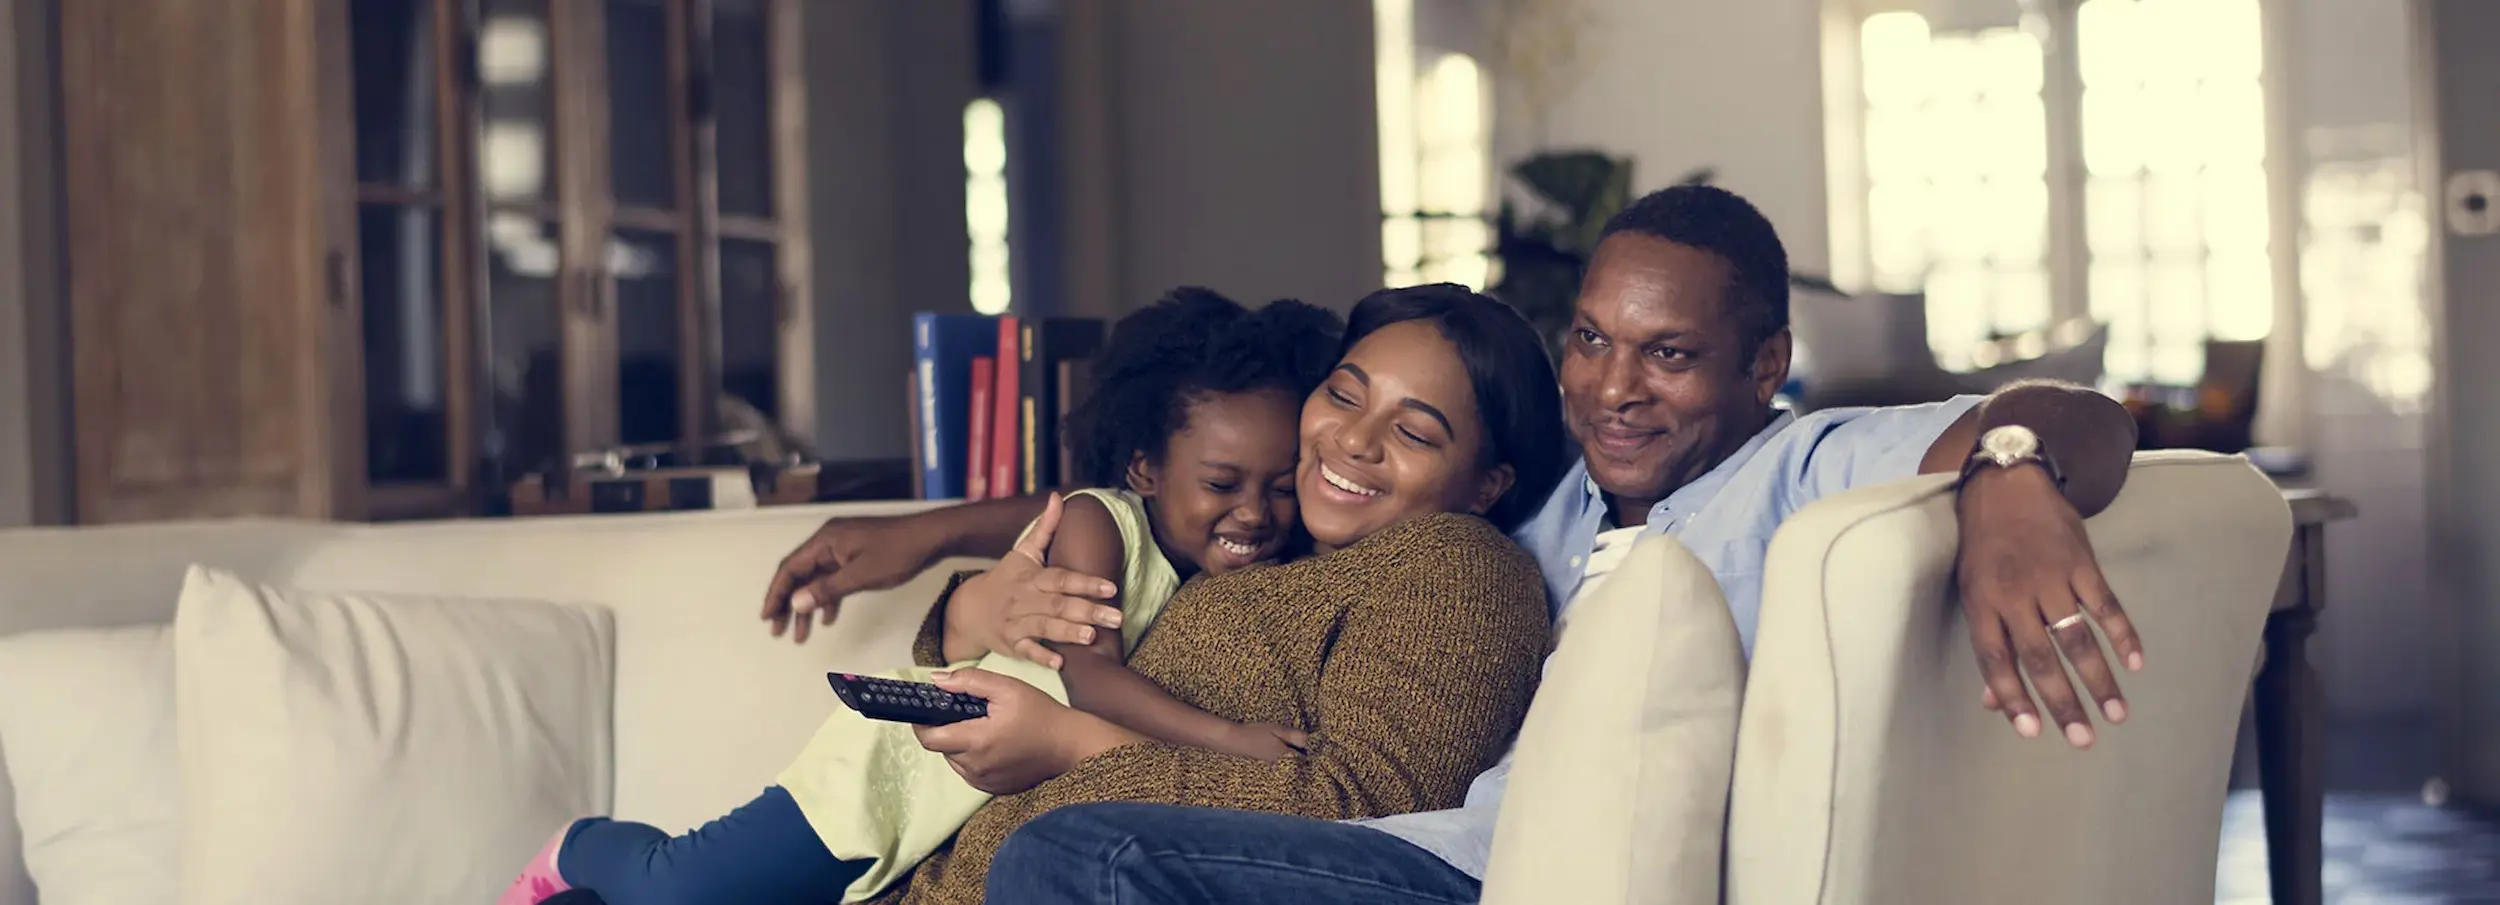 African American family or three smiling and hugging on living room sofa.